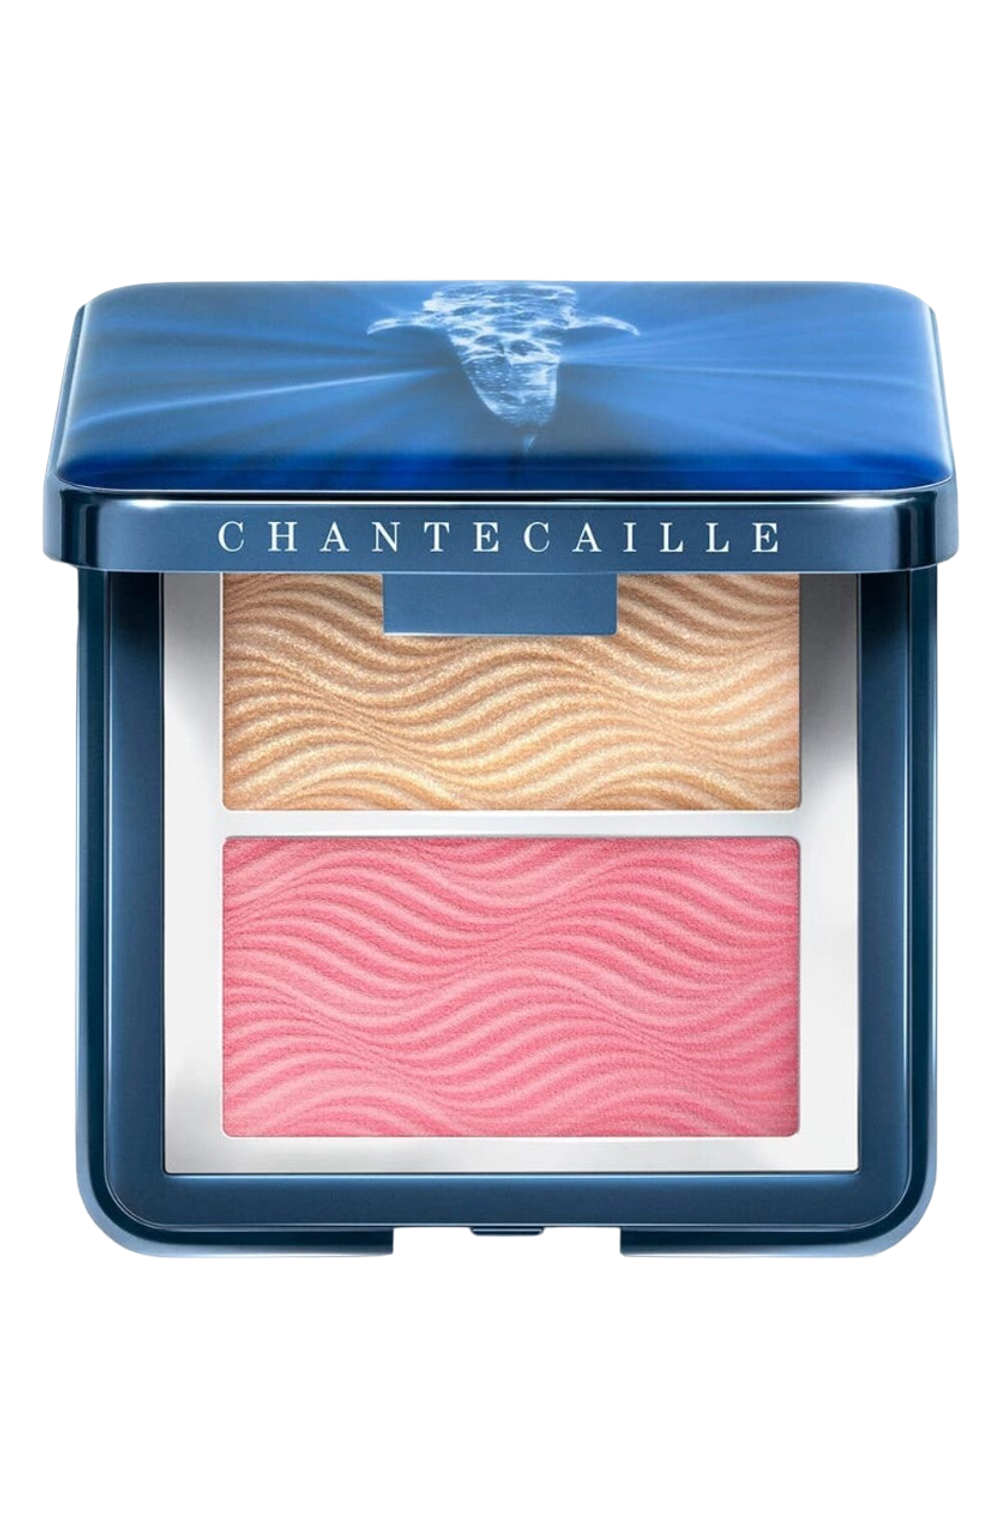 CHANTECAILLE Vibrant Oceans Radiance Chic Cheek And Highlighter Duo